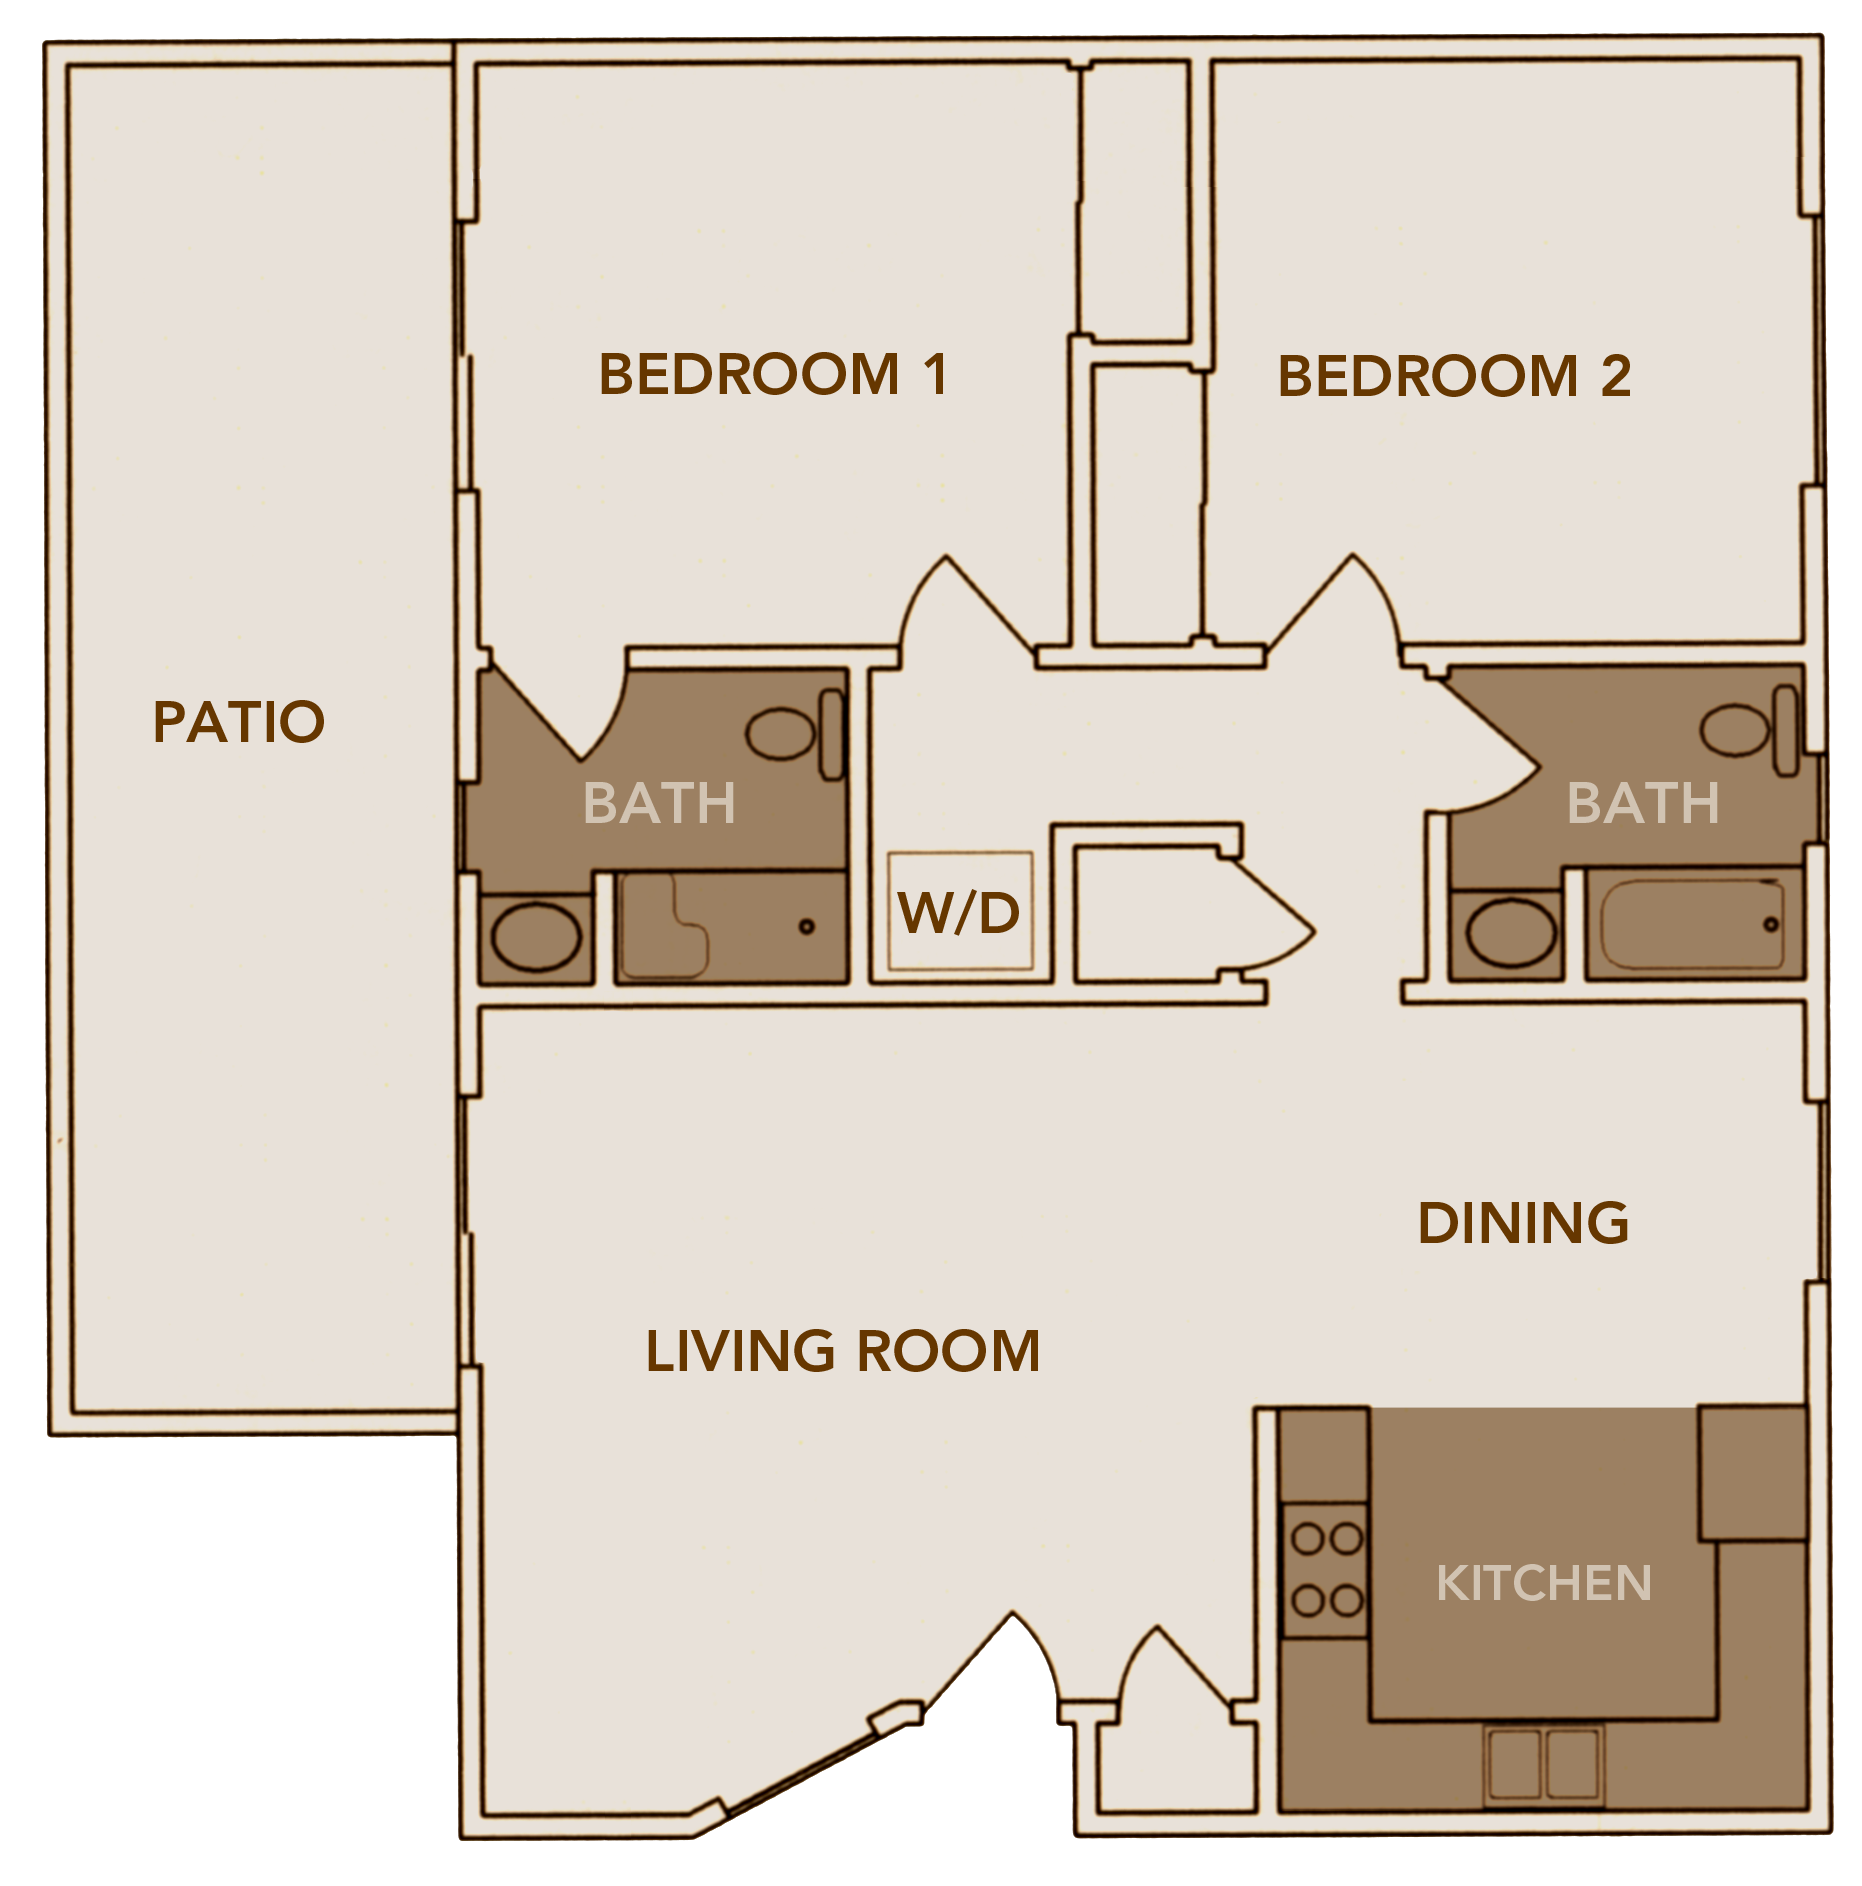 Independent Living Apartments Floor Plans Ontario, CA